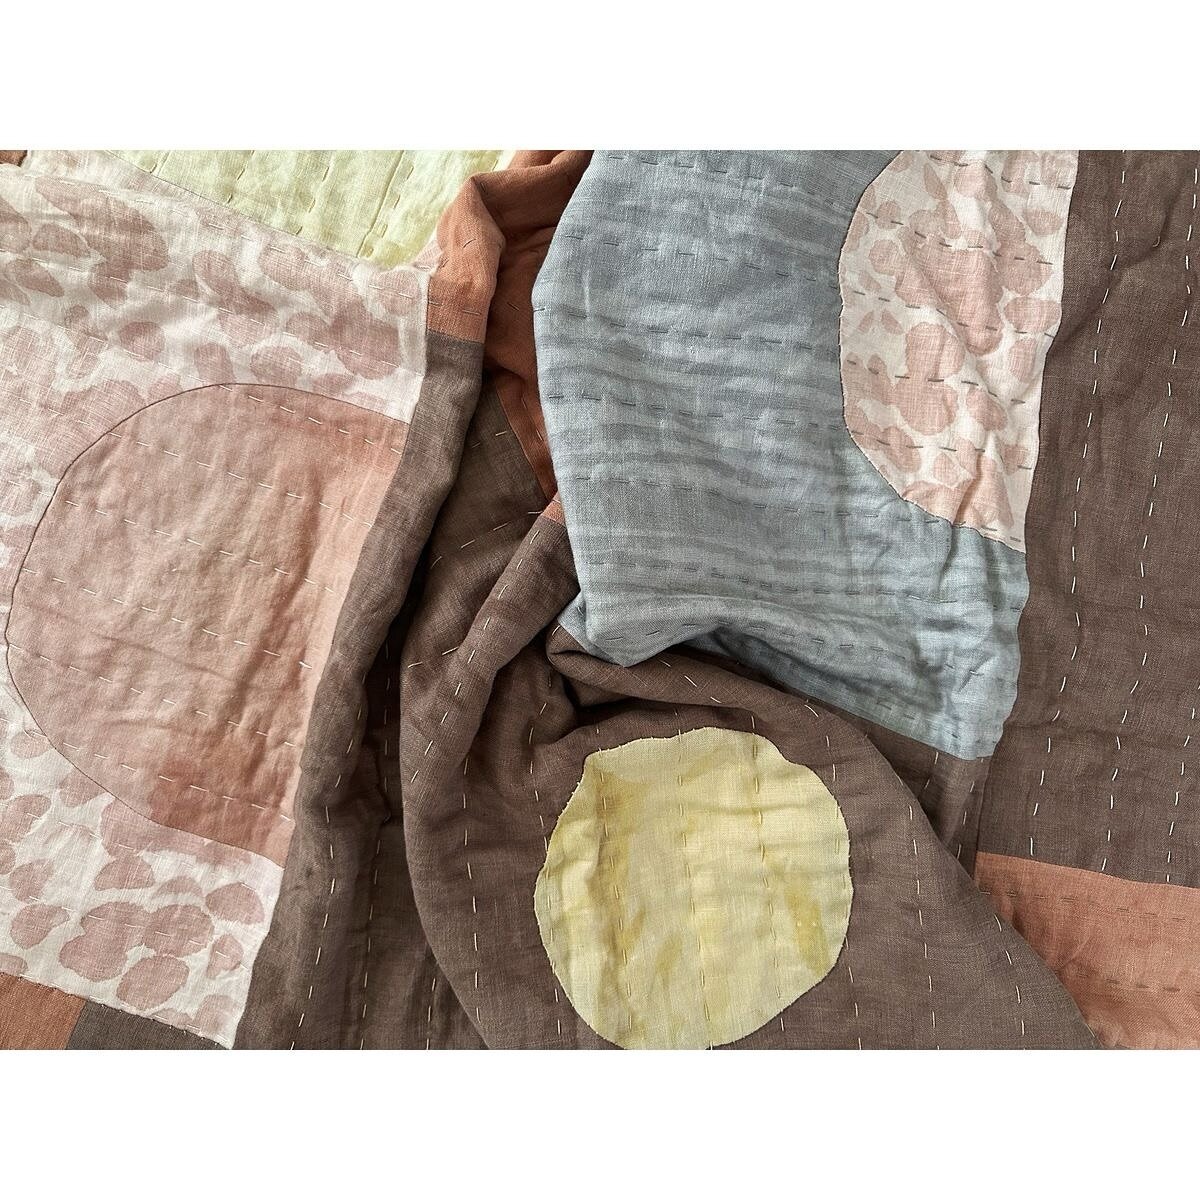 S U N R I S E  S U N S E T  Q U I L T 

Soft and squishy plant dyed linen quilt inspired by the moody British weather and the changing light.

Dyed by me with avocado, and sumac and modified with iron. Some fabrics were pre painted with soya milk or 